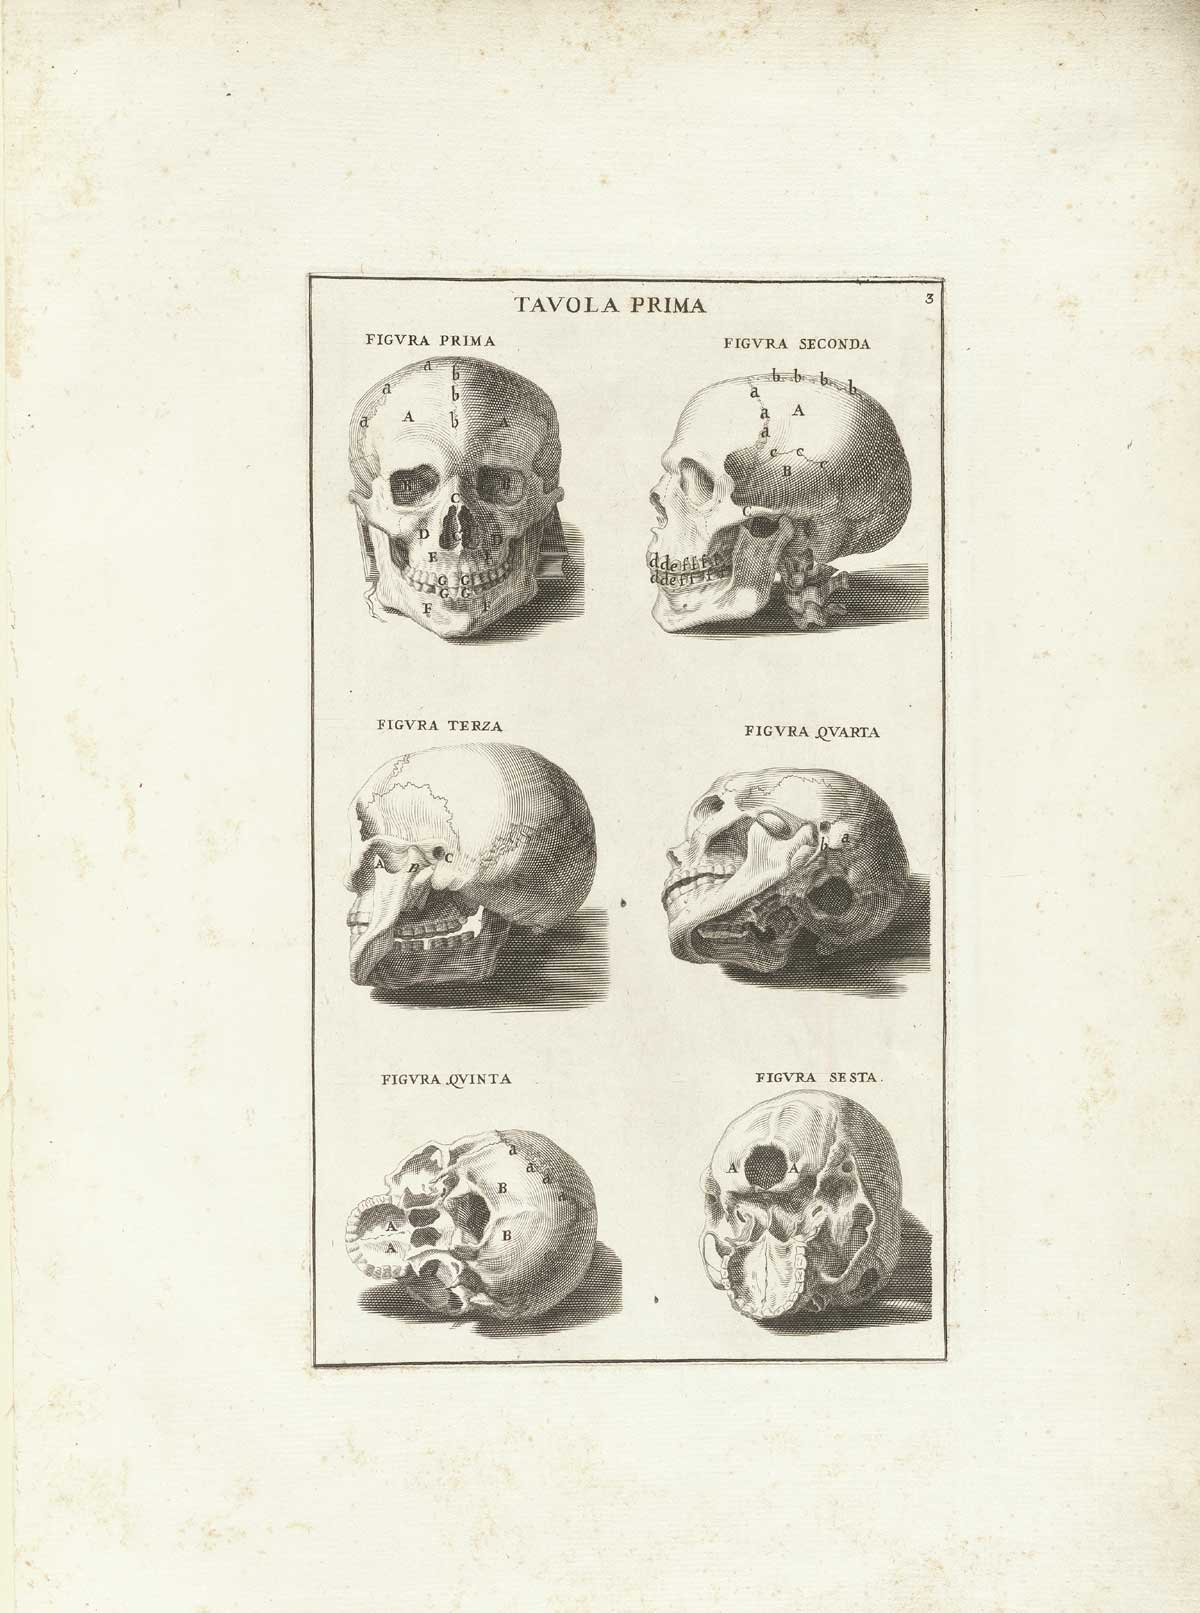 Engraving of six skulls in two columns of three, showing the human skull from different angles including facing, in profile, from behind and from below, from Bernardino Genga’s Anatomia per uso et intelligenza del disegno, NLM Call no.: WZ 250 G329an 1691.